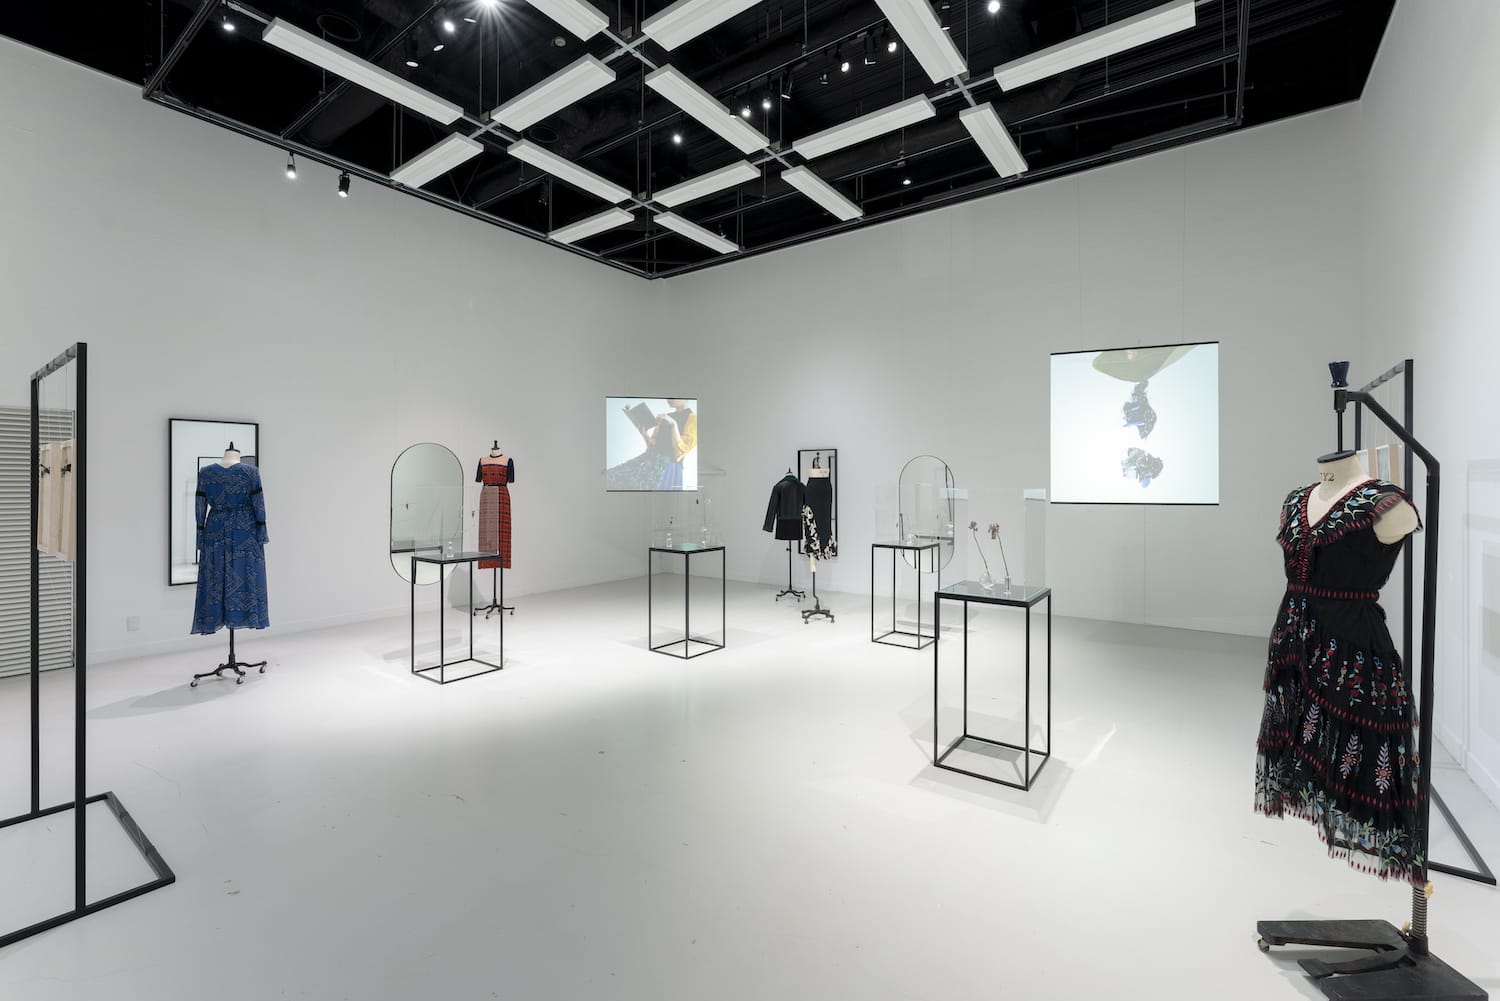 Installation view of “Seian University of Art and Design”